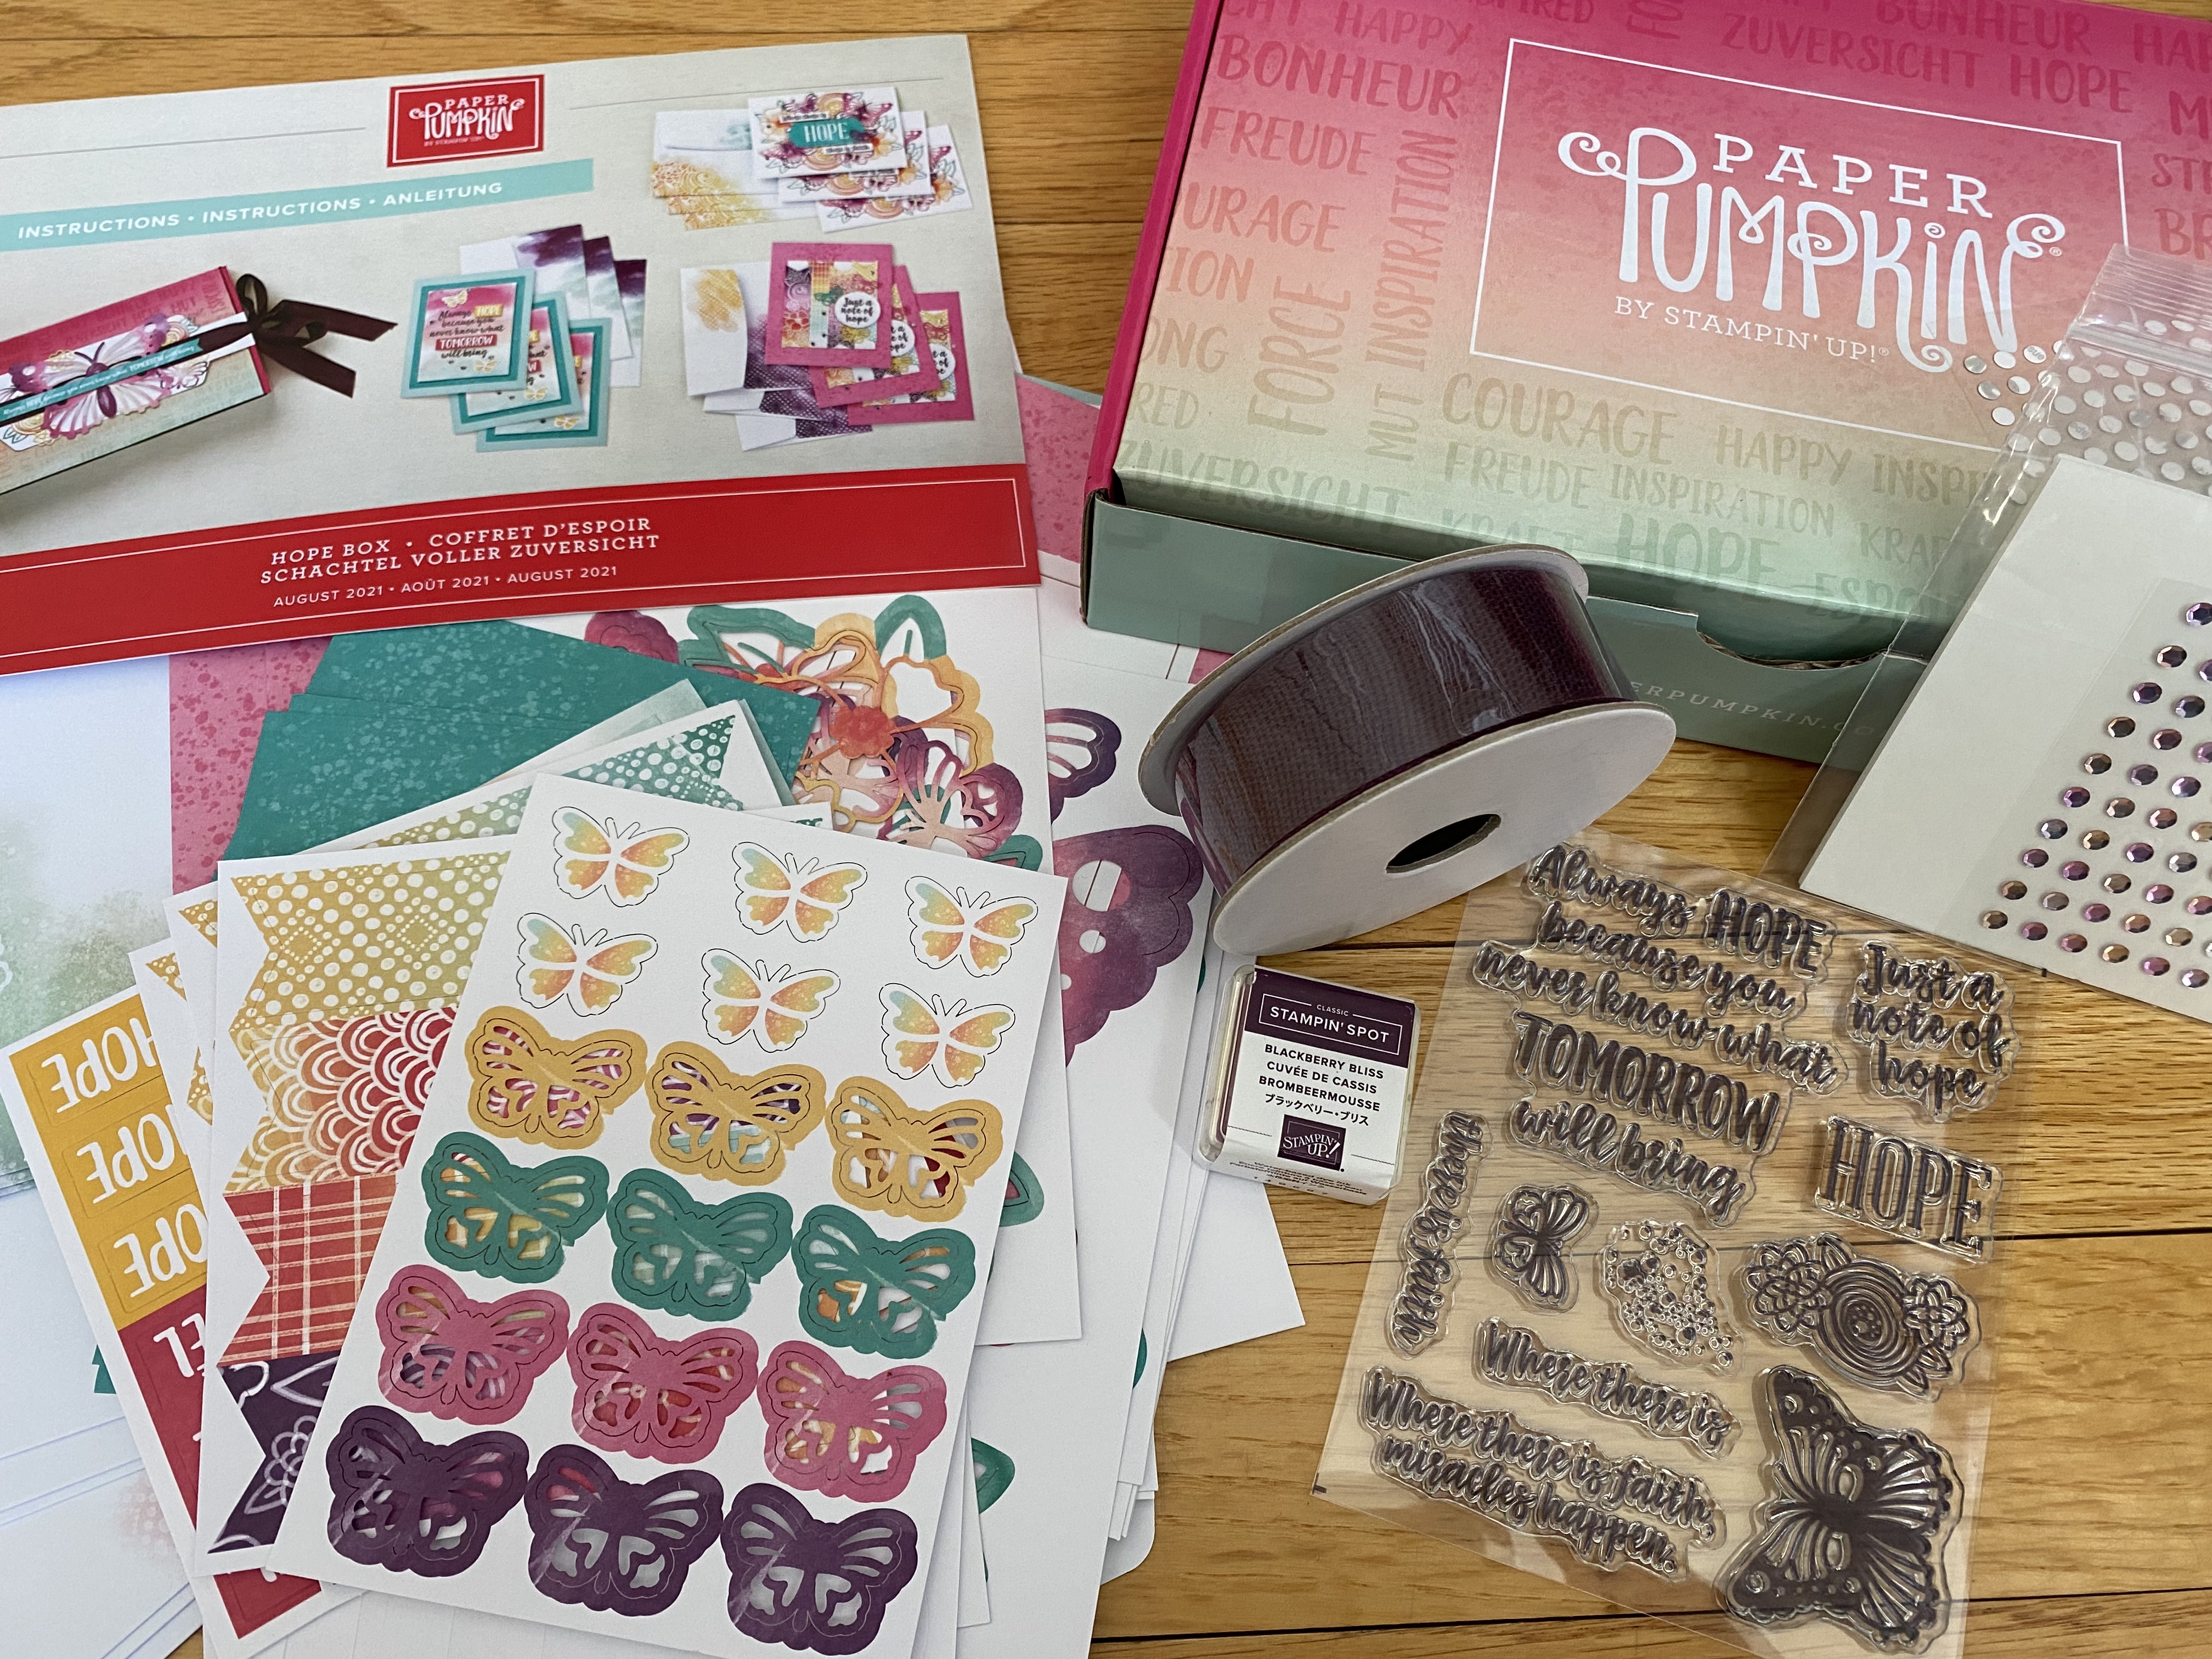 Example Cardmaking Kit covered by your $20 supply fee